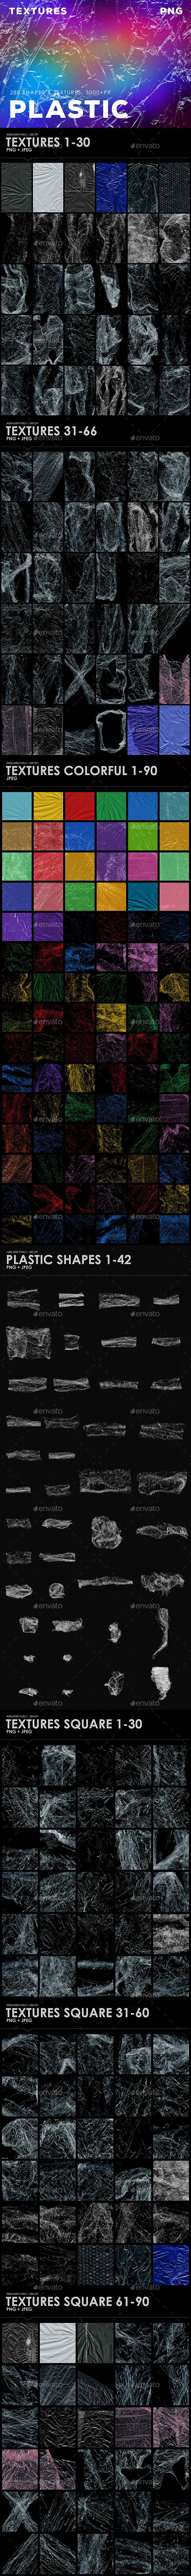 288 Plastic Overlays, Shapes, Textures